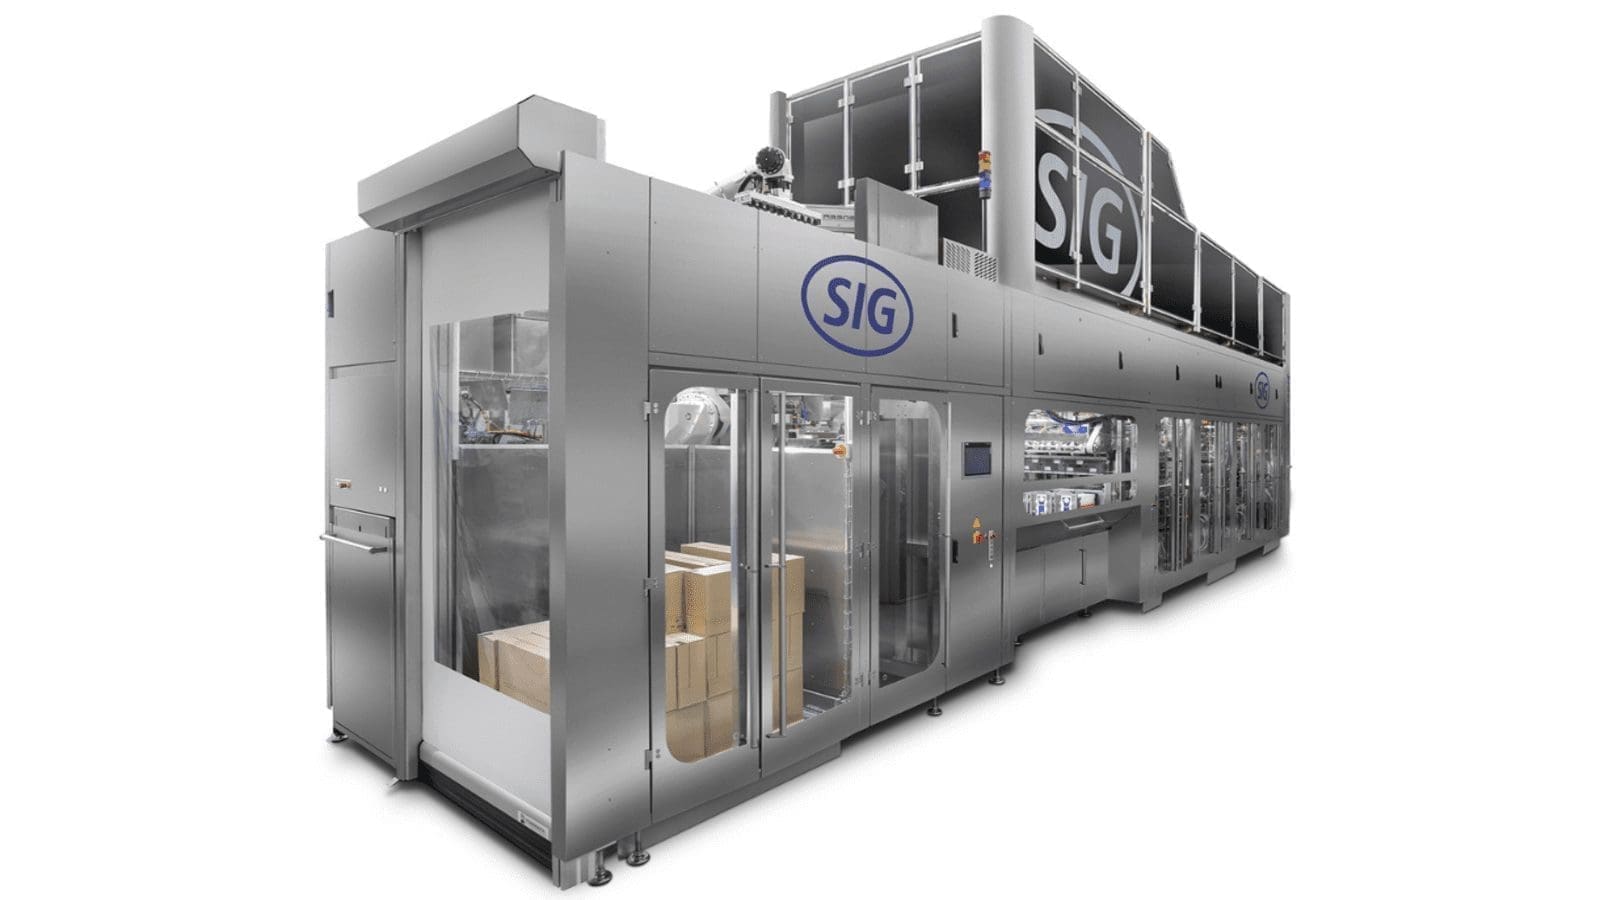 SIG debuts “world’s fastest” beverage filling machine, Harpak-ULMA introduces multi-side-seal capabilities for food packaging